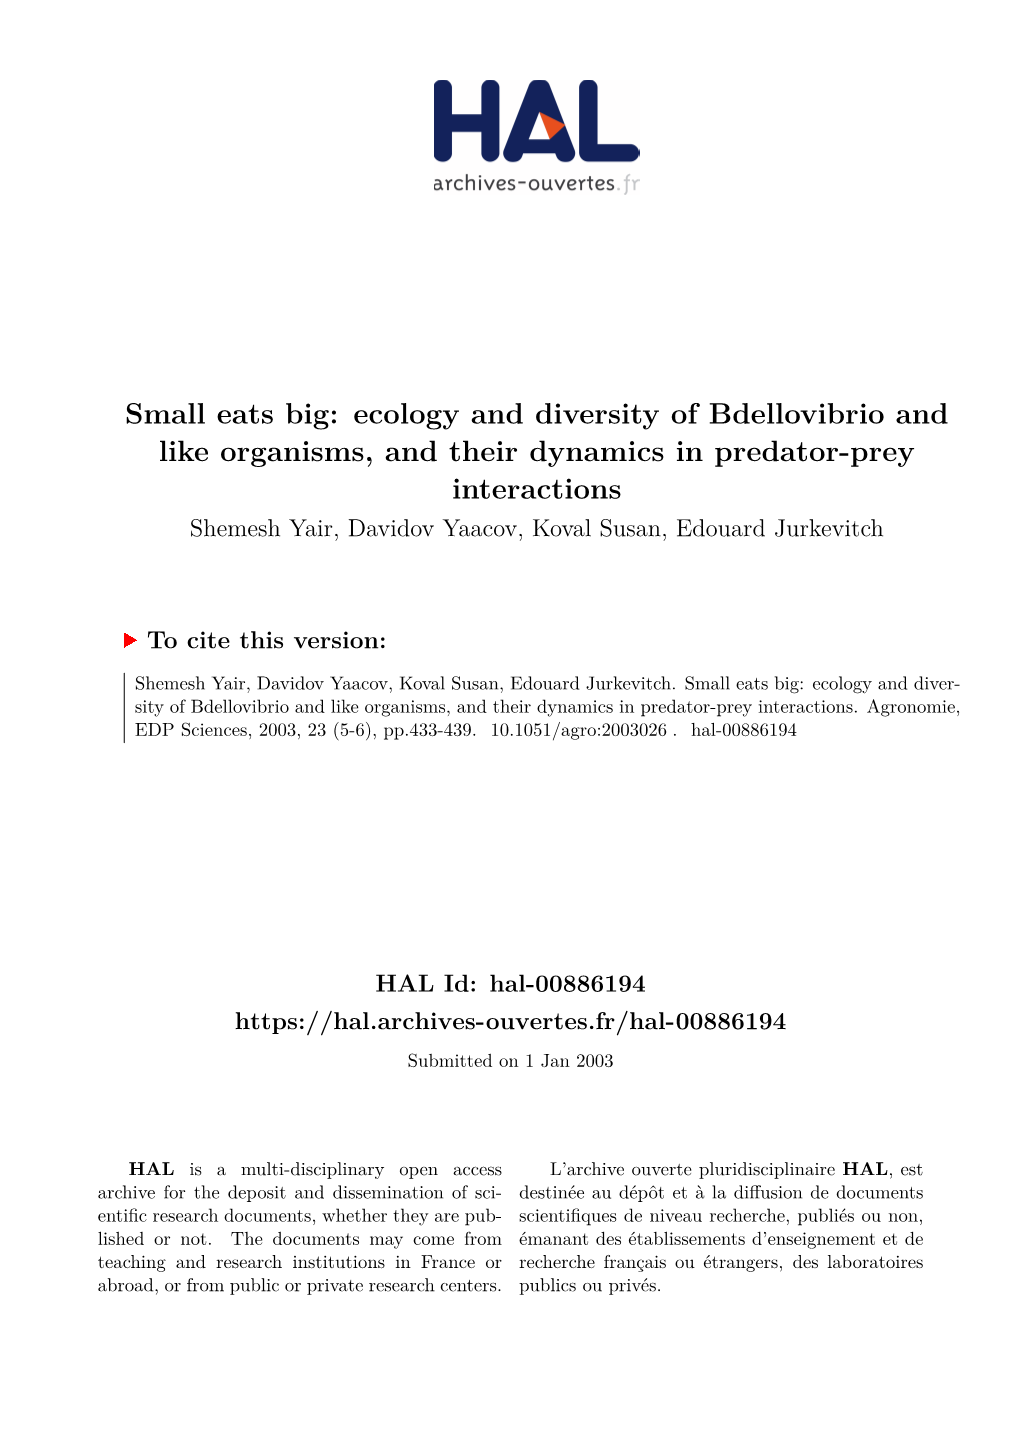 Small Eats Big: Ecology and Diversity of Bdellovibrio and Like Organisms